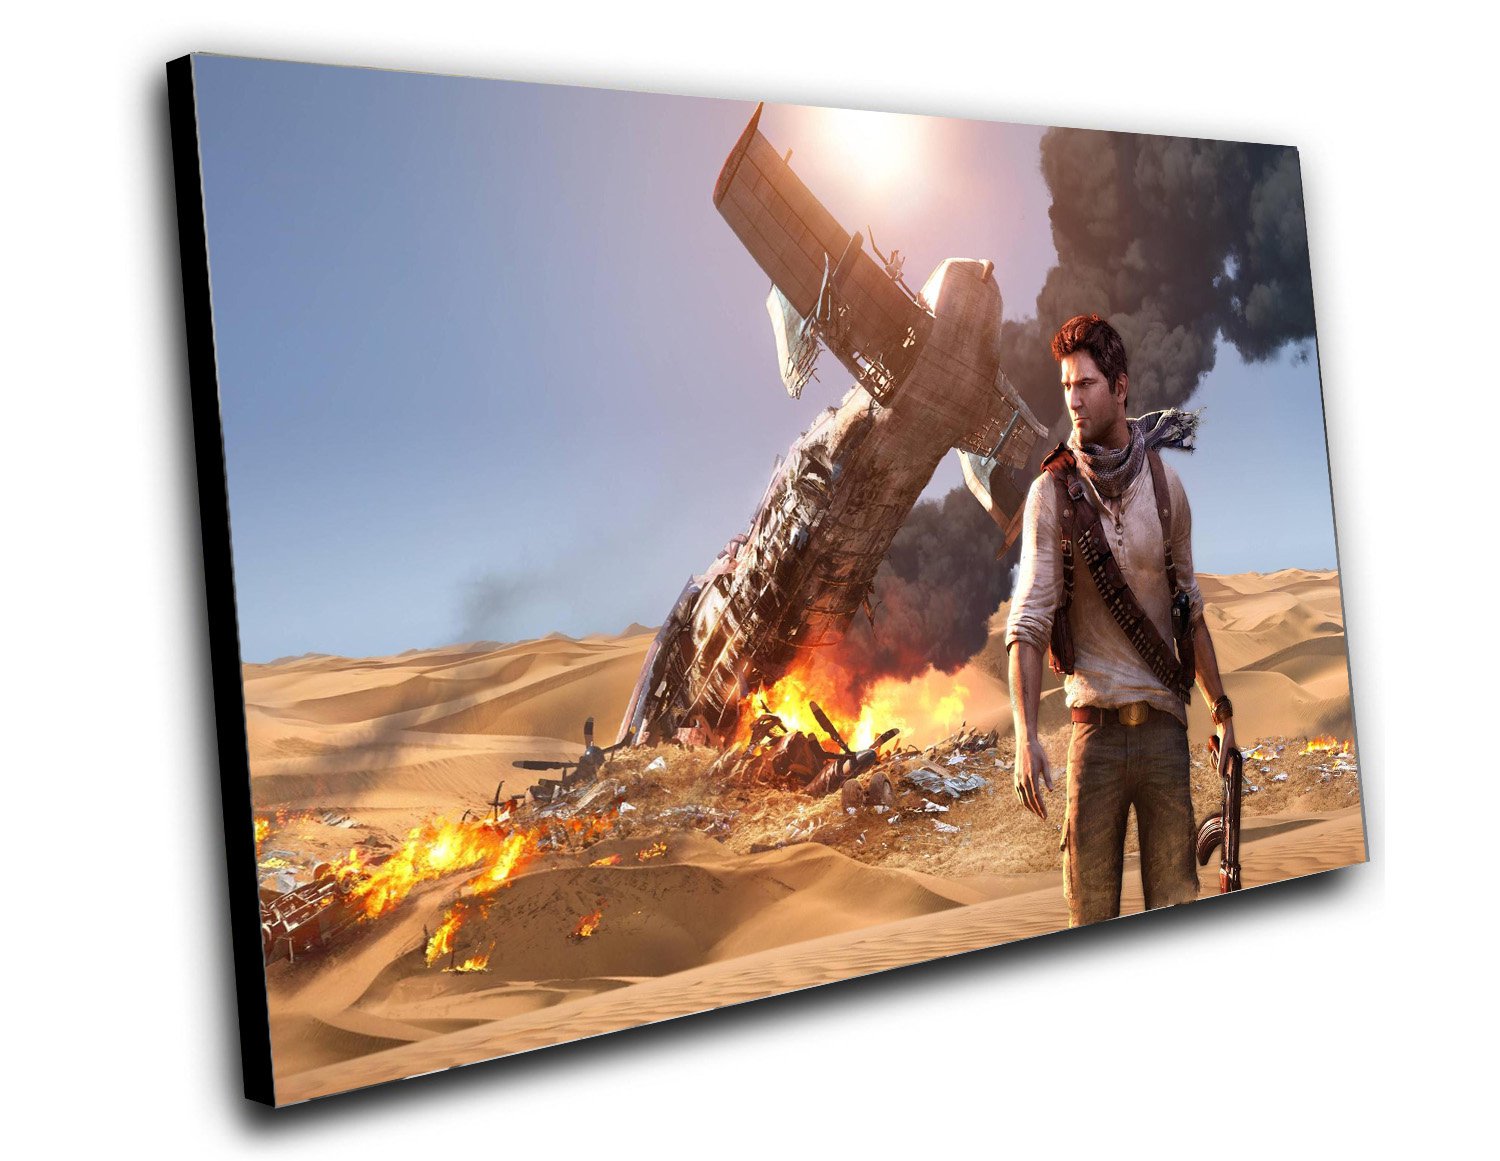 Uncharted 4 A Thief's End Game 8"x12" (20cm/30cm) Canvas Print